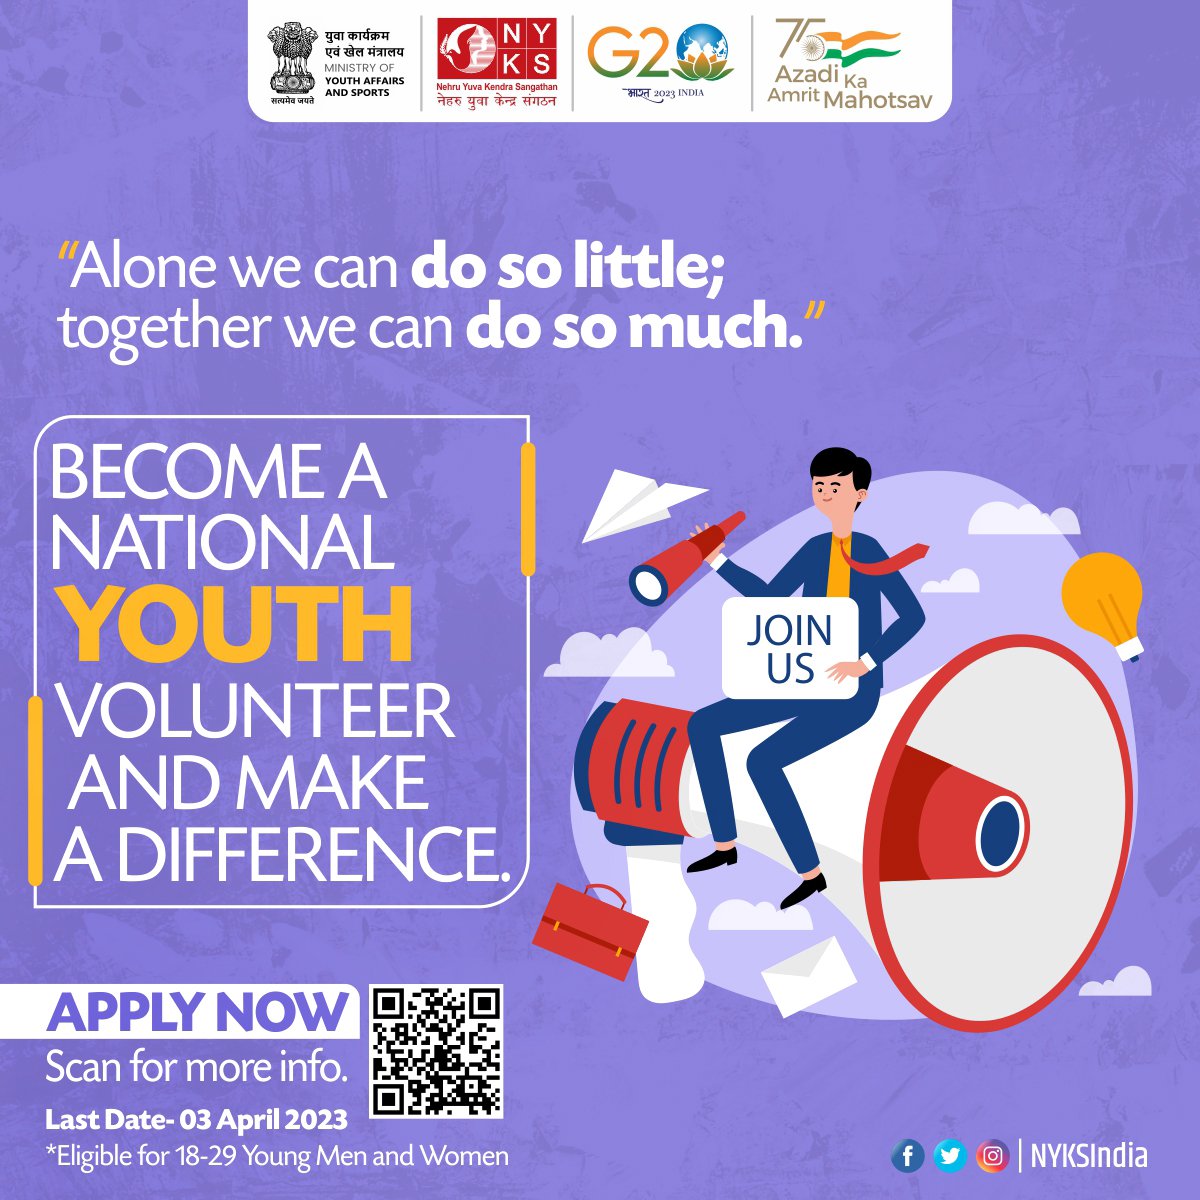 Become a National Youth Volunteer and make a difference.
Eligible for 18-29 Young Men and Women.
For more information connect with your nearest NYK district offices.
or Scan the QR code.

#NYV #YouthVolunteer #NyksIndia #Youth #India #RegistrationOpen